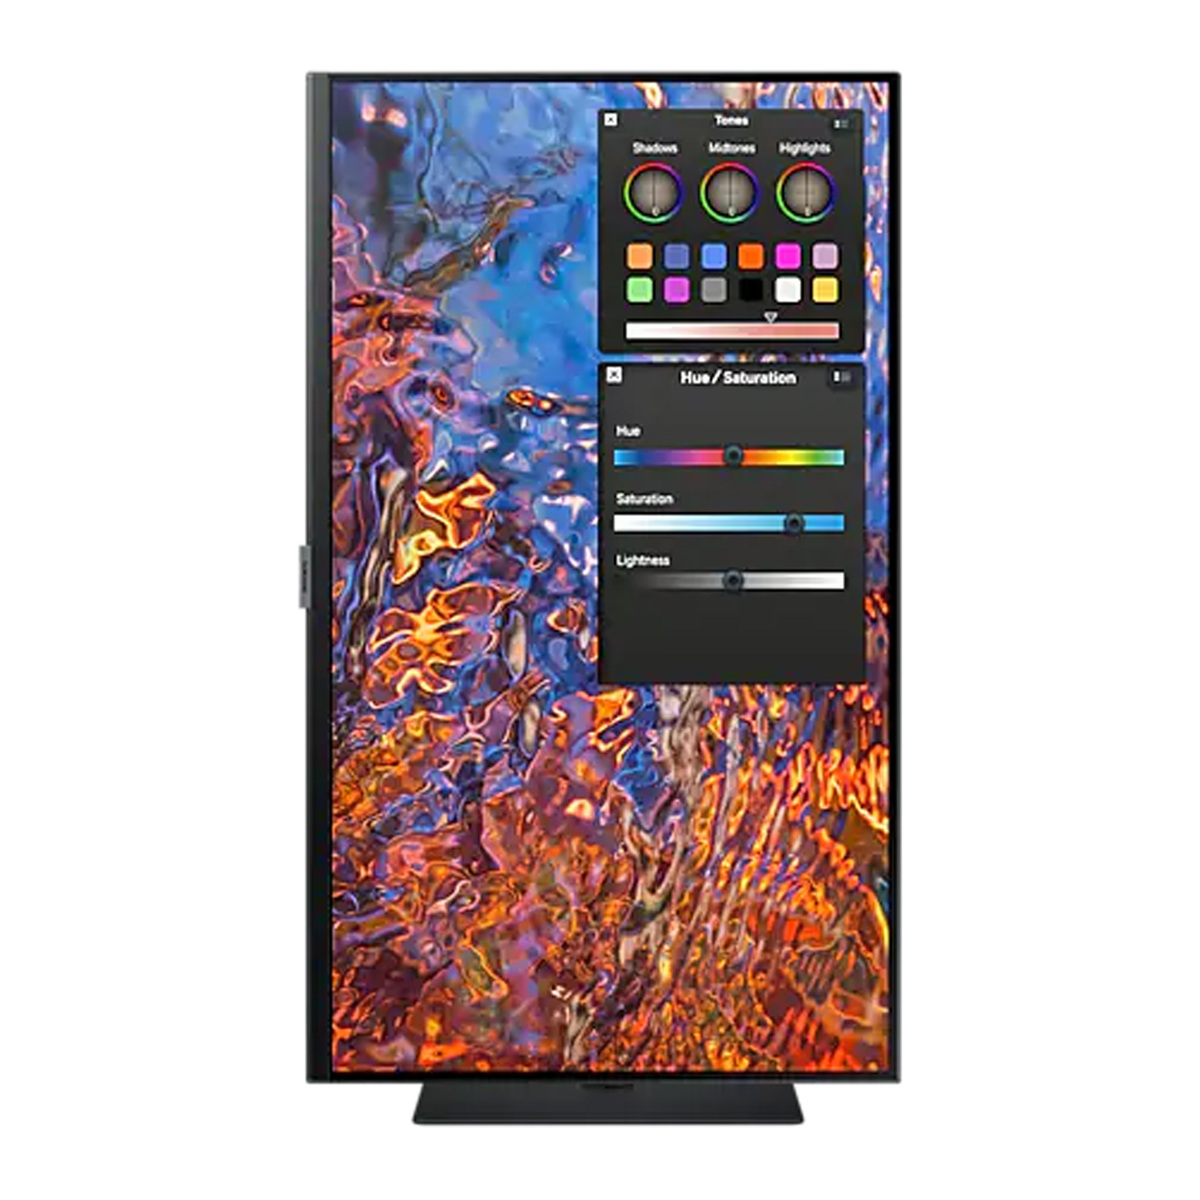 Samsung 32 inches HDR600 and USB type-C UHD Monitor, Black, LS32B800PXMXUE